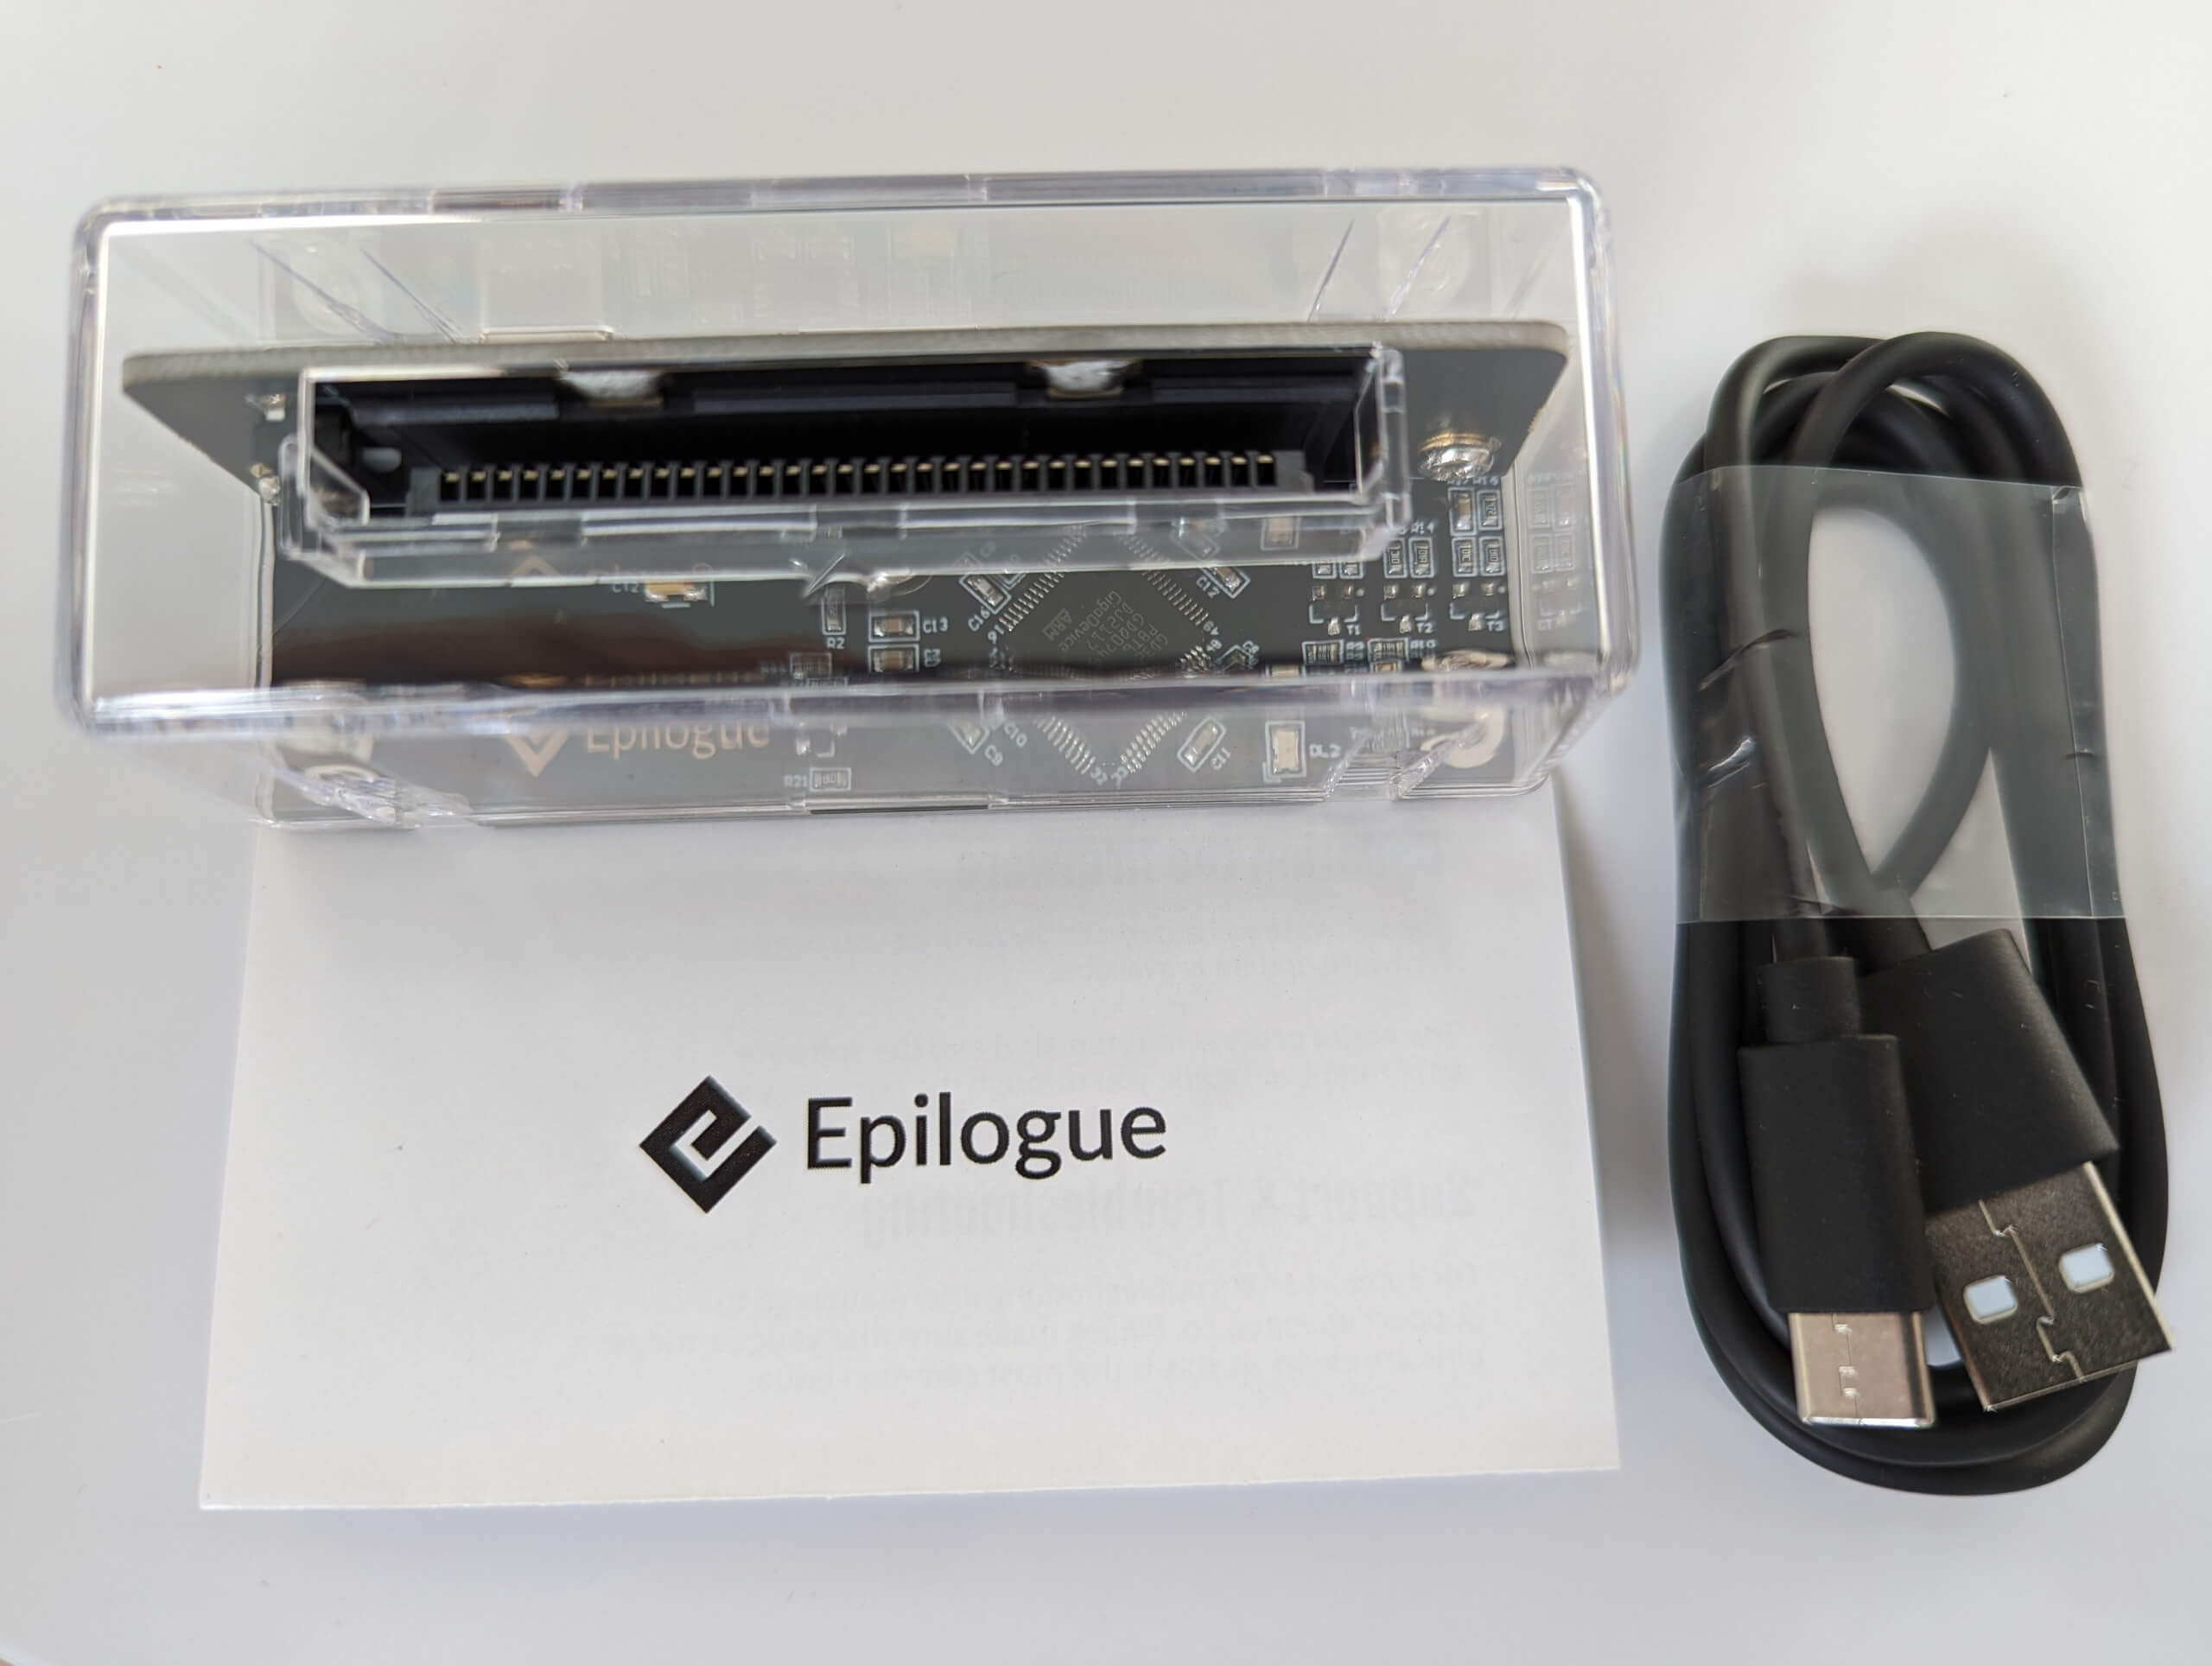 contents of the Epilogue GB Operator box showing the GB Operator device, a small white booklet with the Epilogue name and logo on it in black text, and a black USB-A to USB-C cable